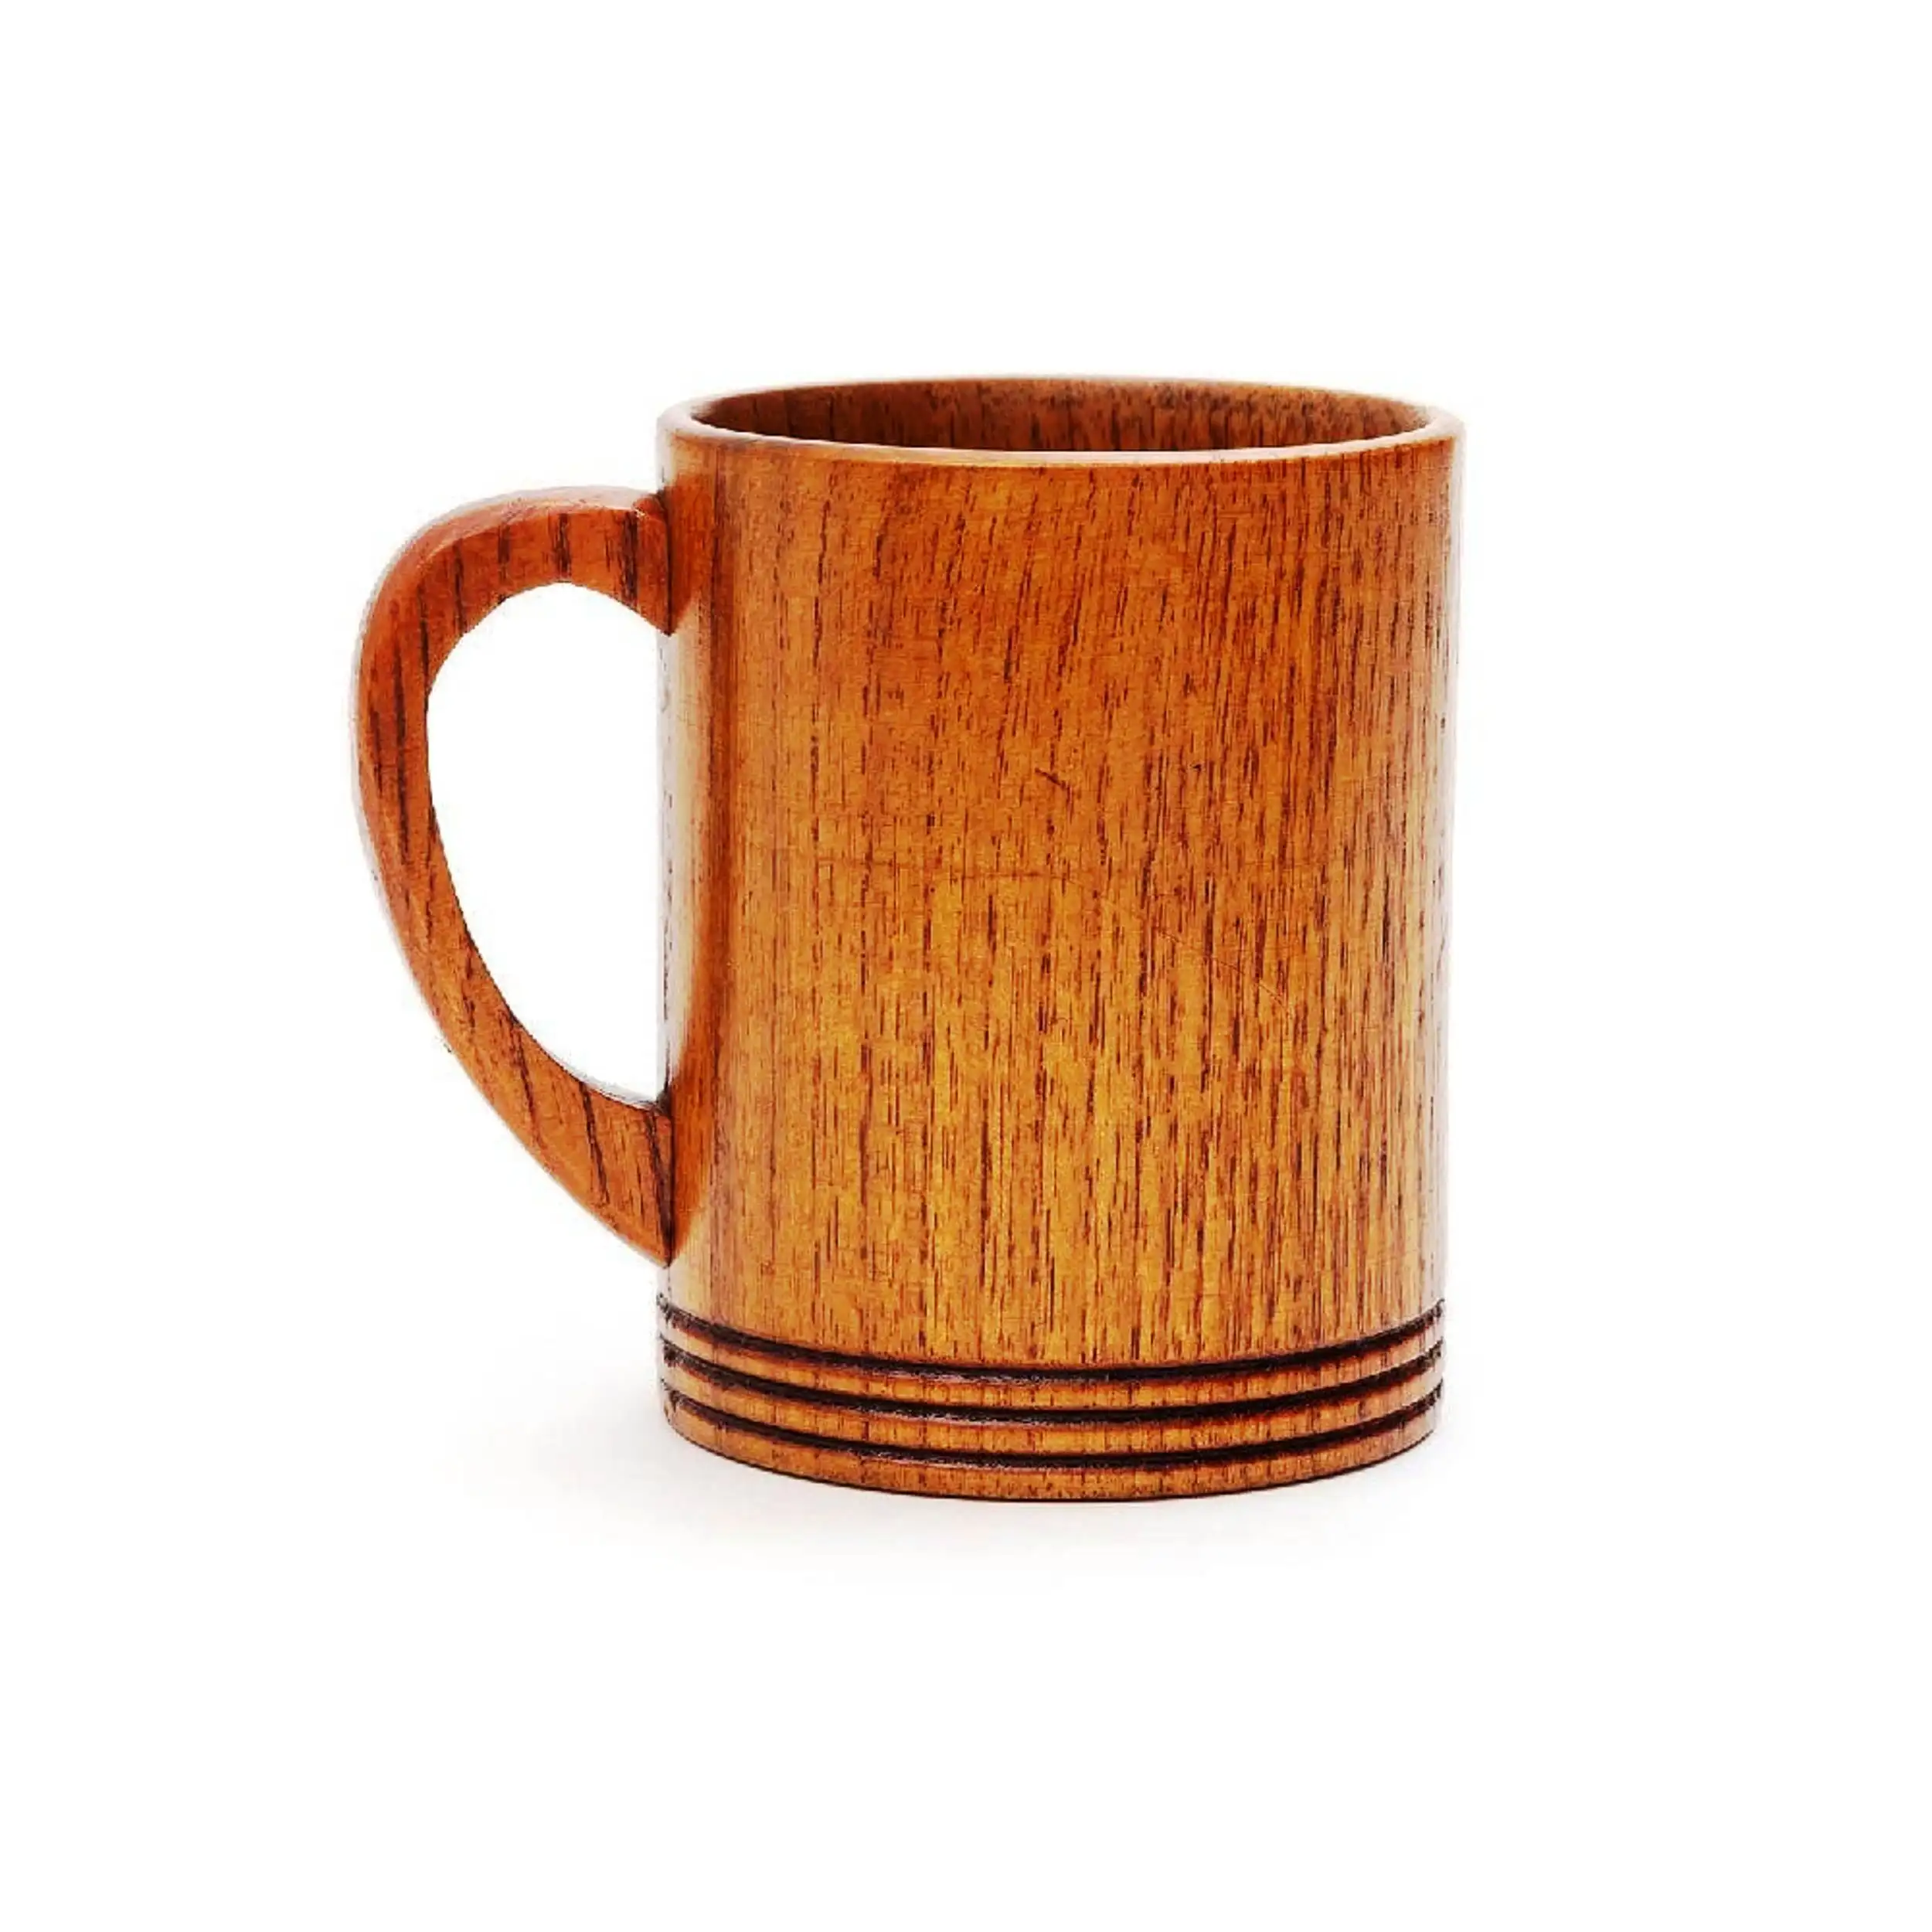 13 Triple Lined Wooden Mug 250 ml Wooden Solid Coffee Cup Mug with Insulation Handmade Unique Design Made In India